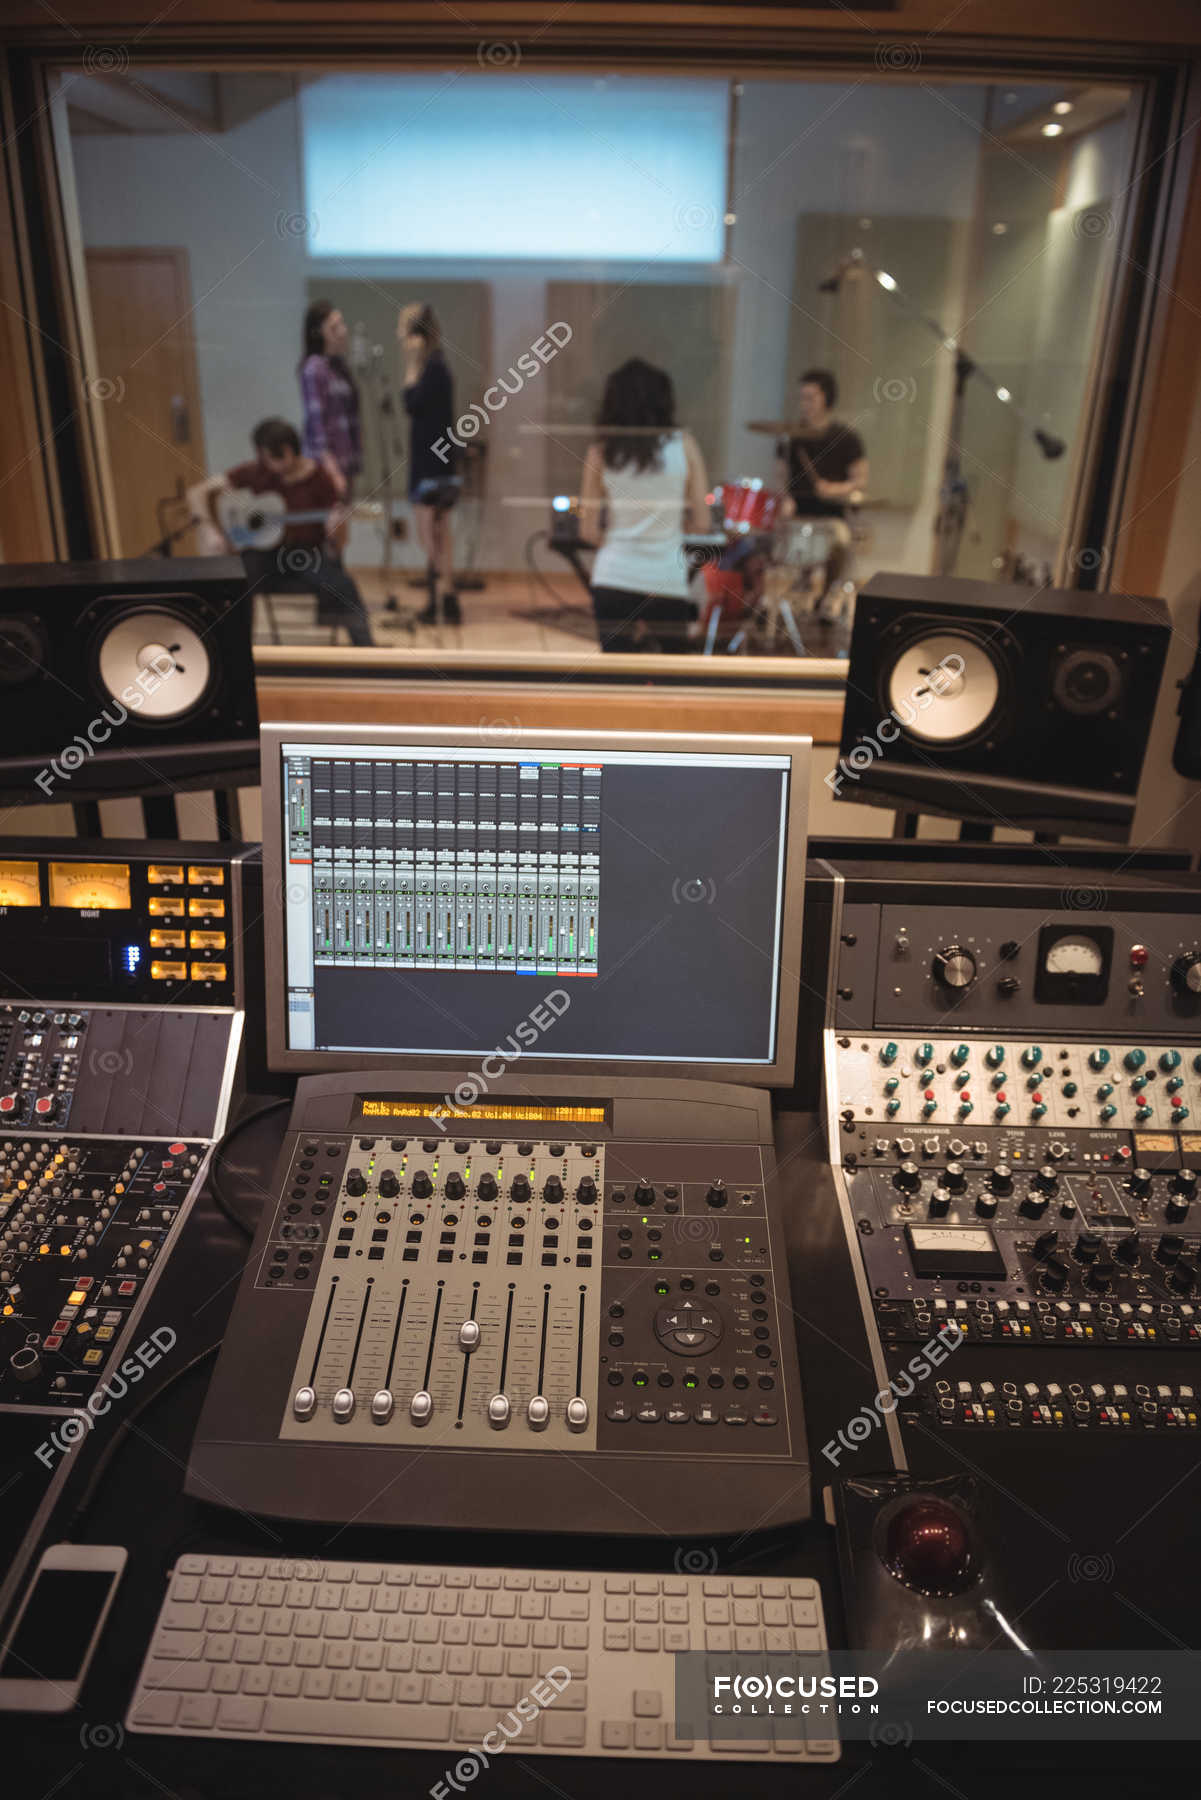 Sound mixer in a recording studio with musicians in background — monitor,  keyboard - Stock Photo | #225319422